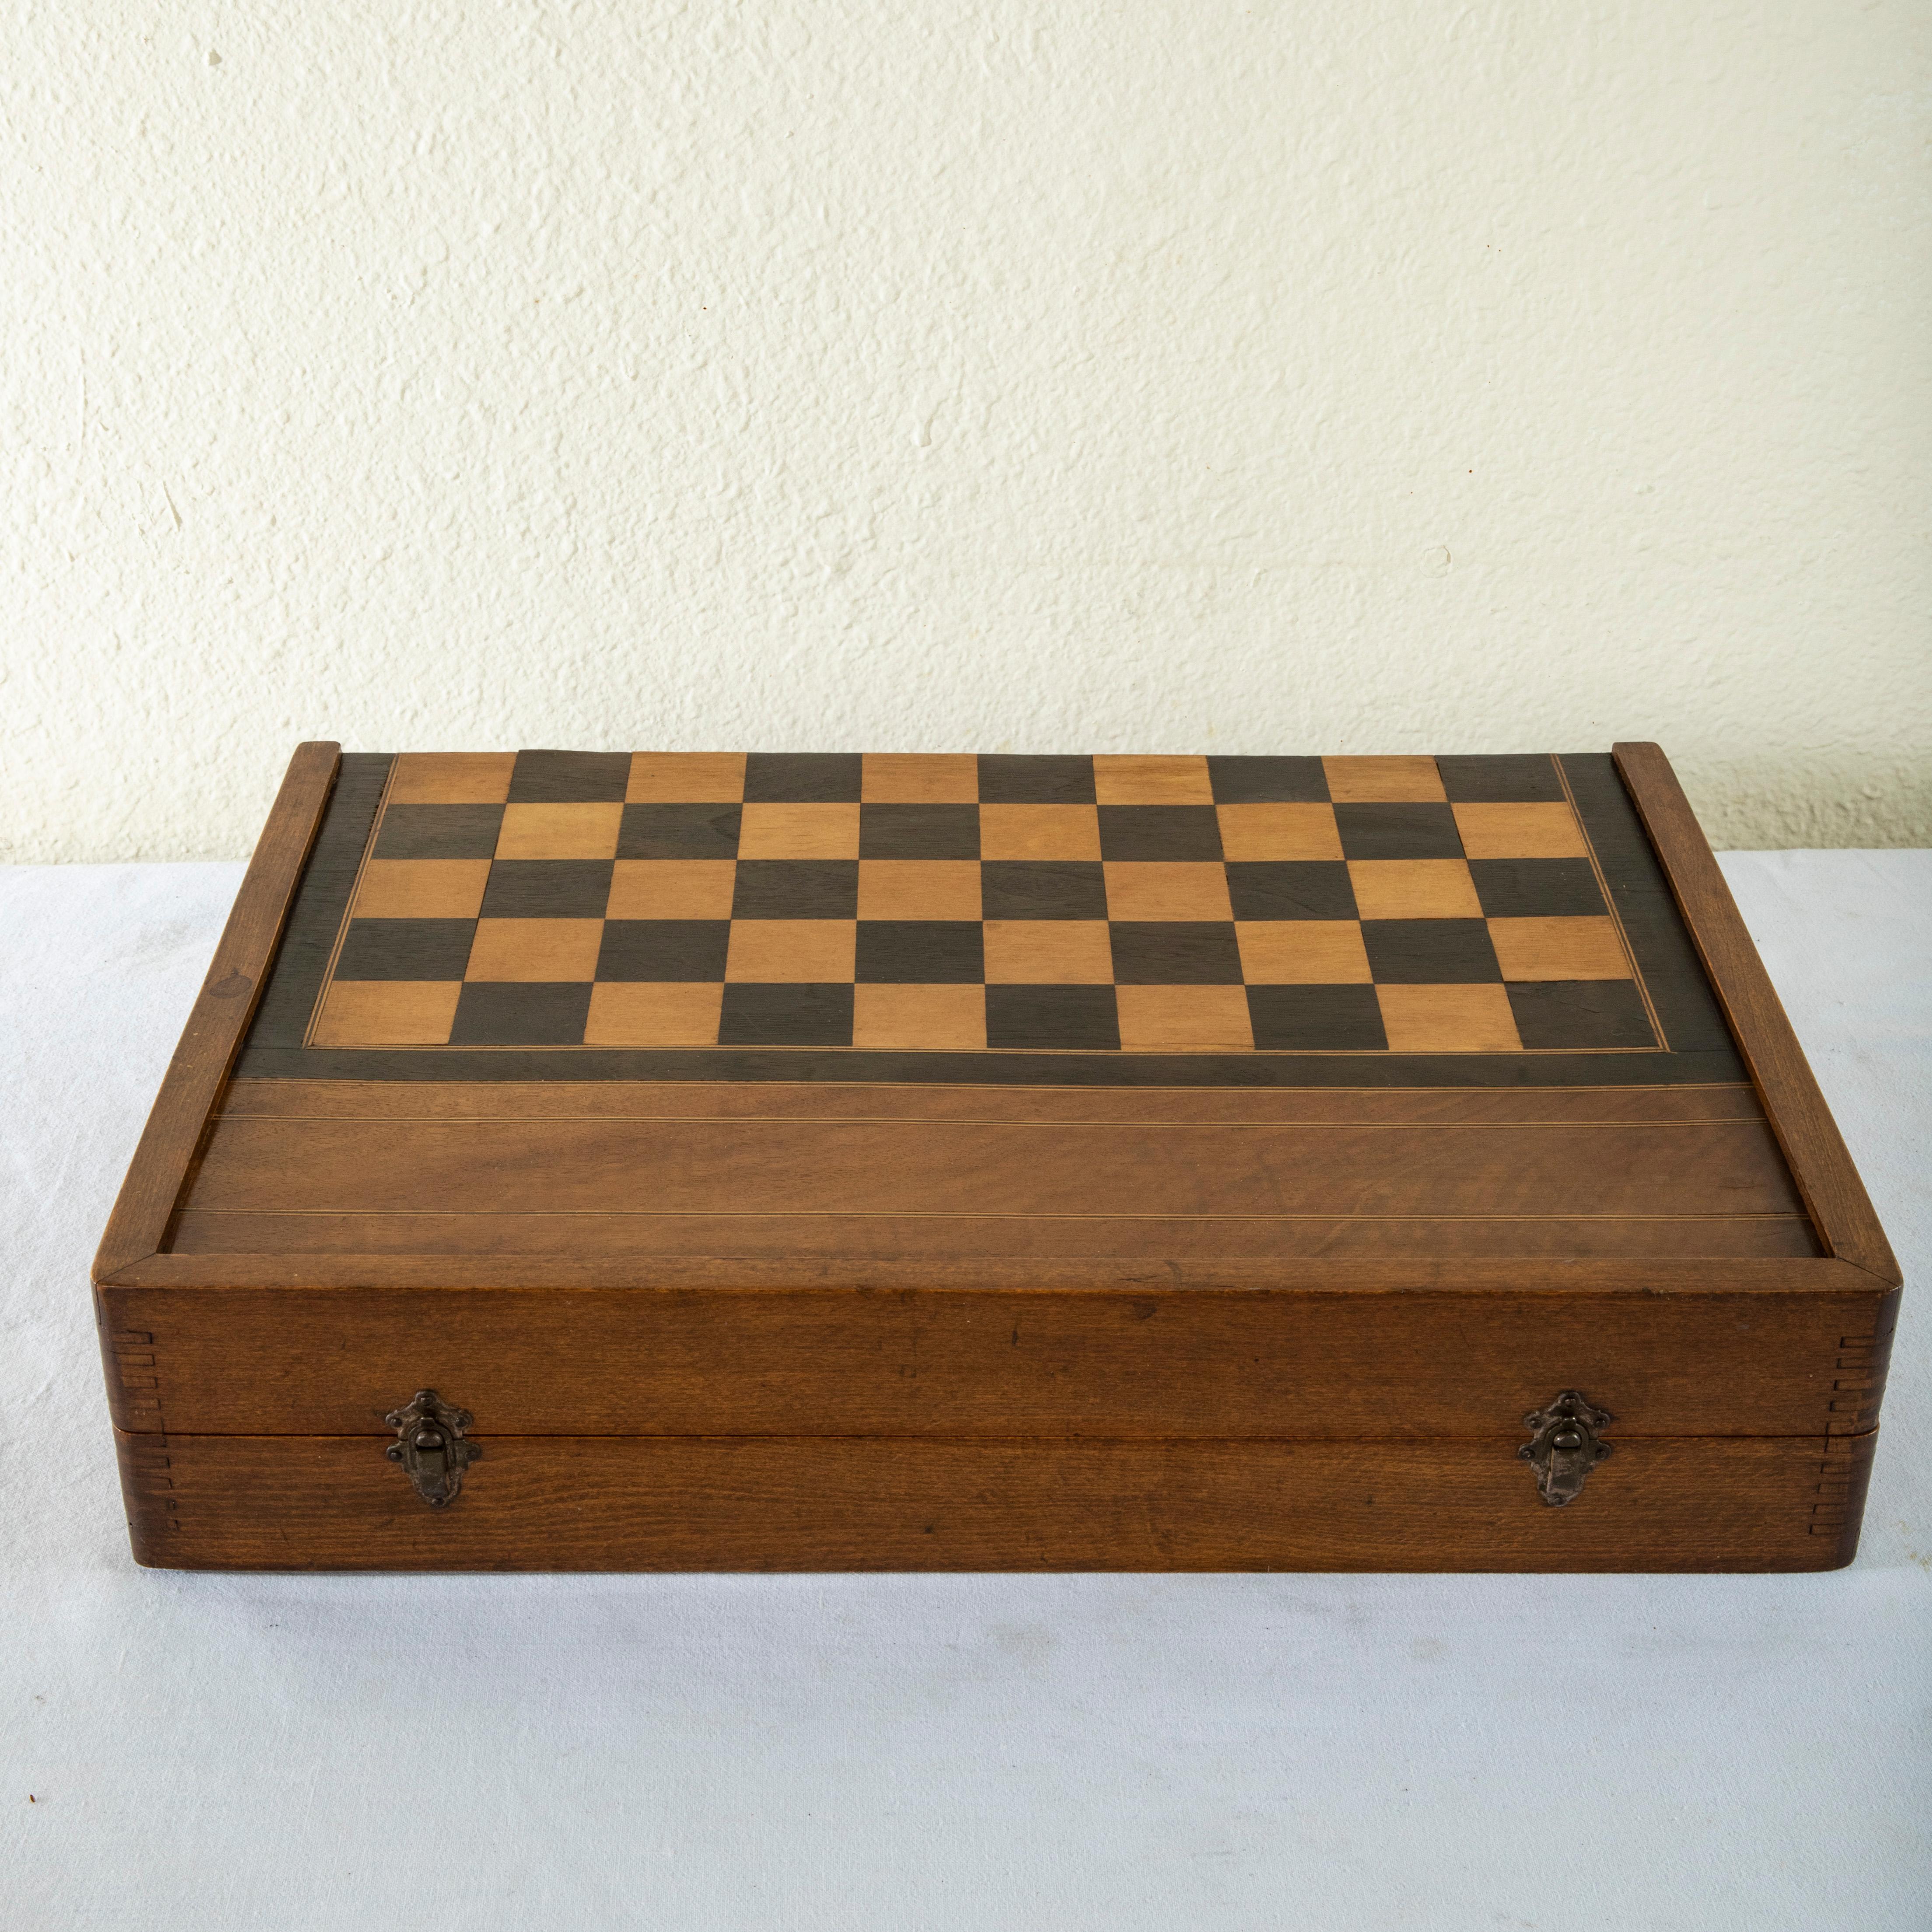 Early 20th Century French Marquetry Game Box, Backgammon, Checkers In Good Condition For Sale In Fayetteville, AR